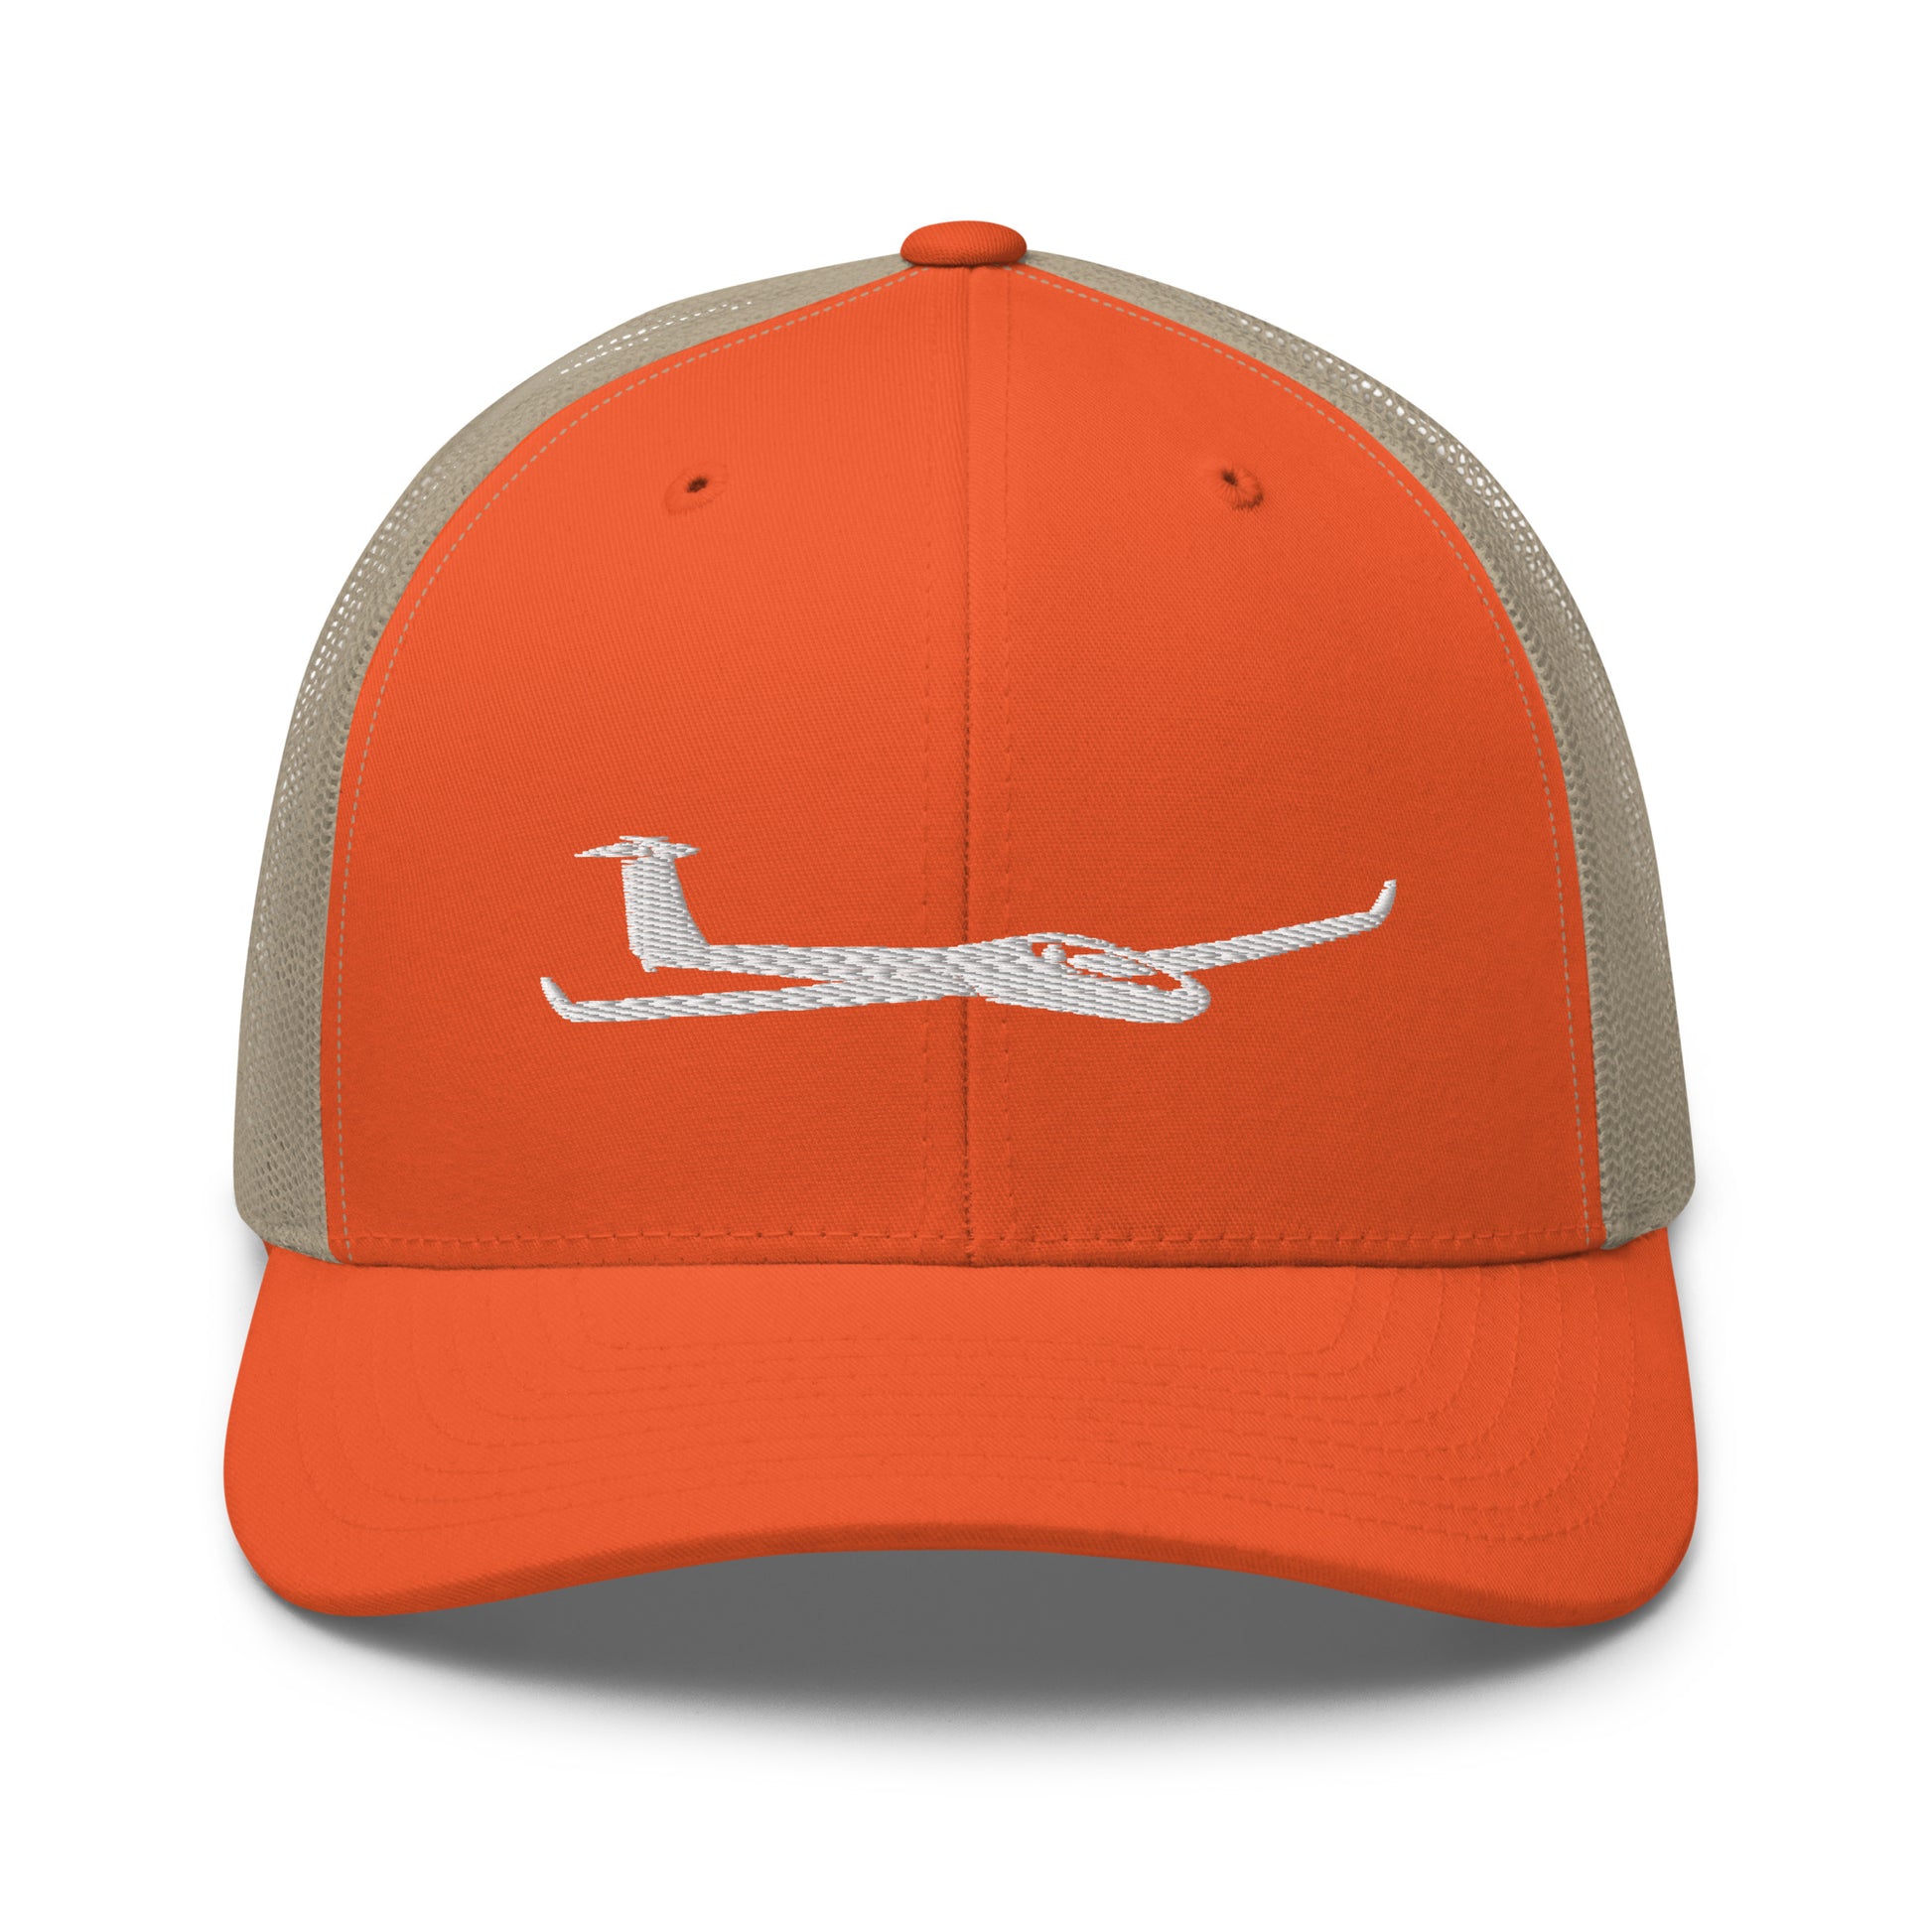 Glider Trucker Hat.  A orange and beige Yupoong 6606 hat with a white glider embroidered on the front panel.